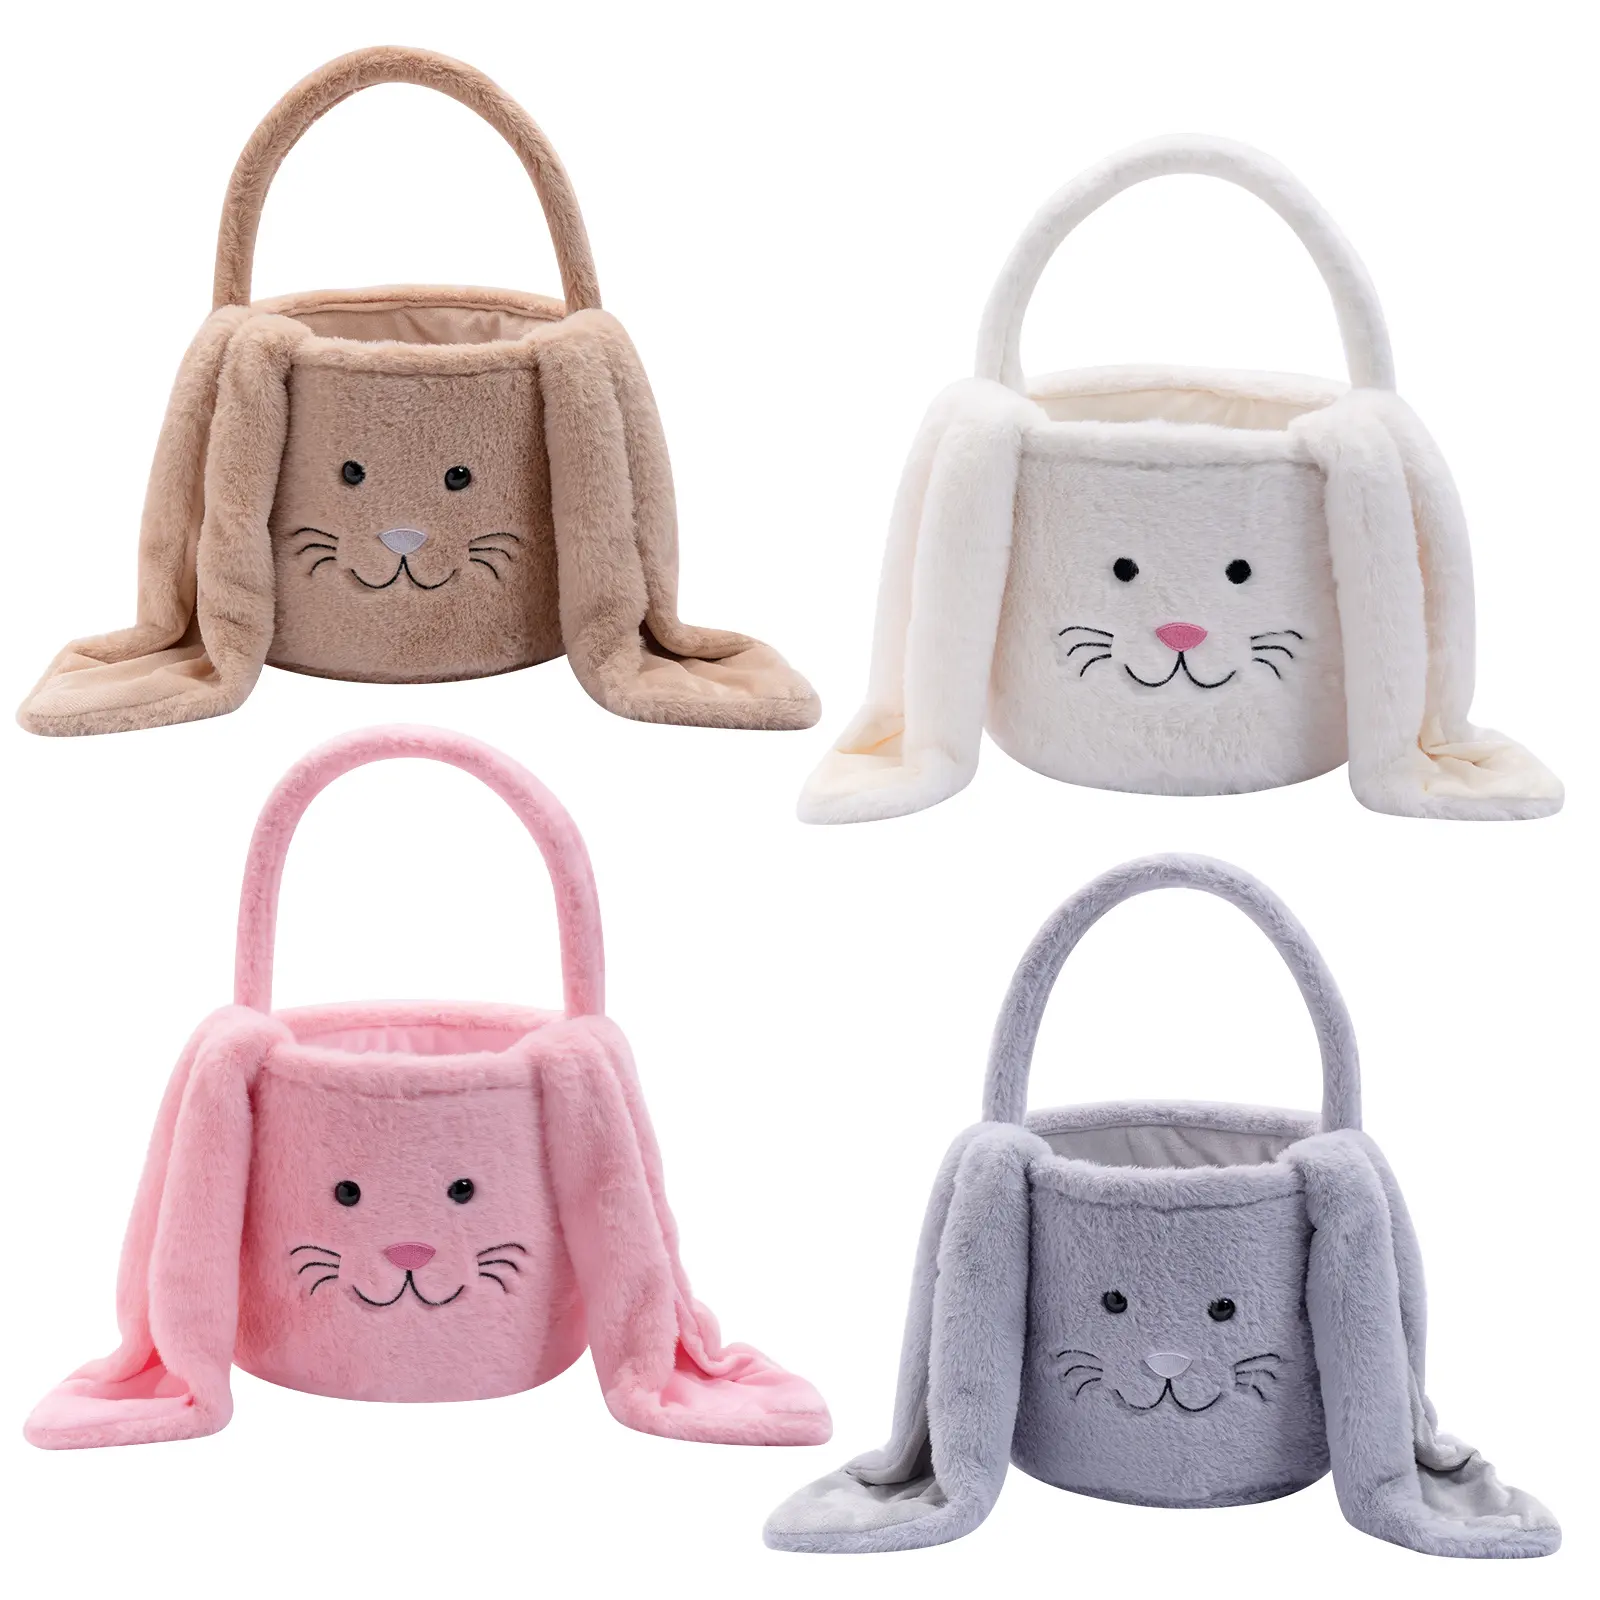 Cute Personalized Easter Plush Tote Bag Long-eared Treat Easter Bucket Baby Bunny Gift Candy Bag Embroidered Easter Basket